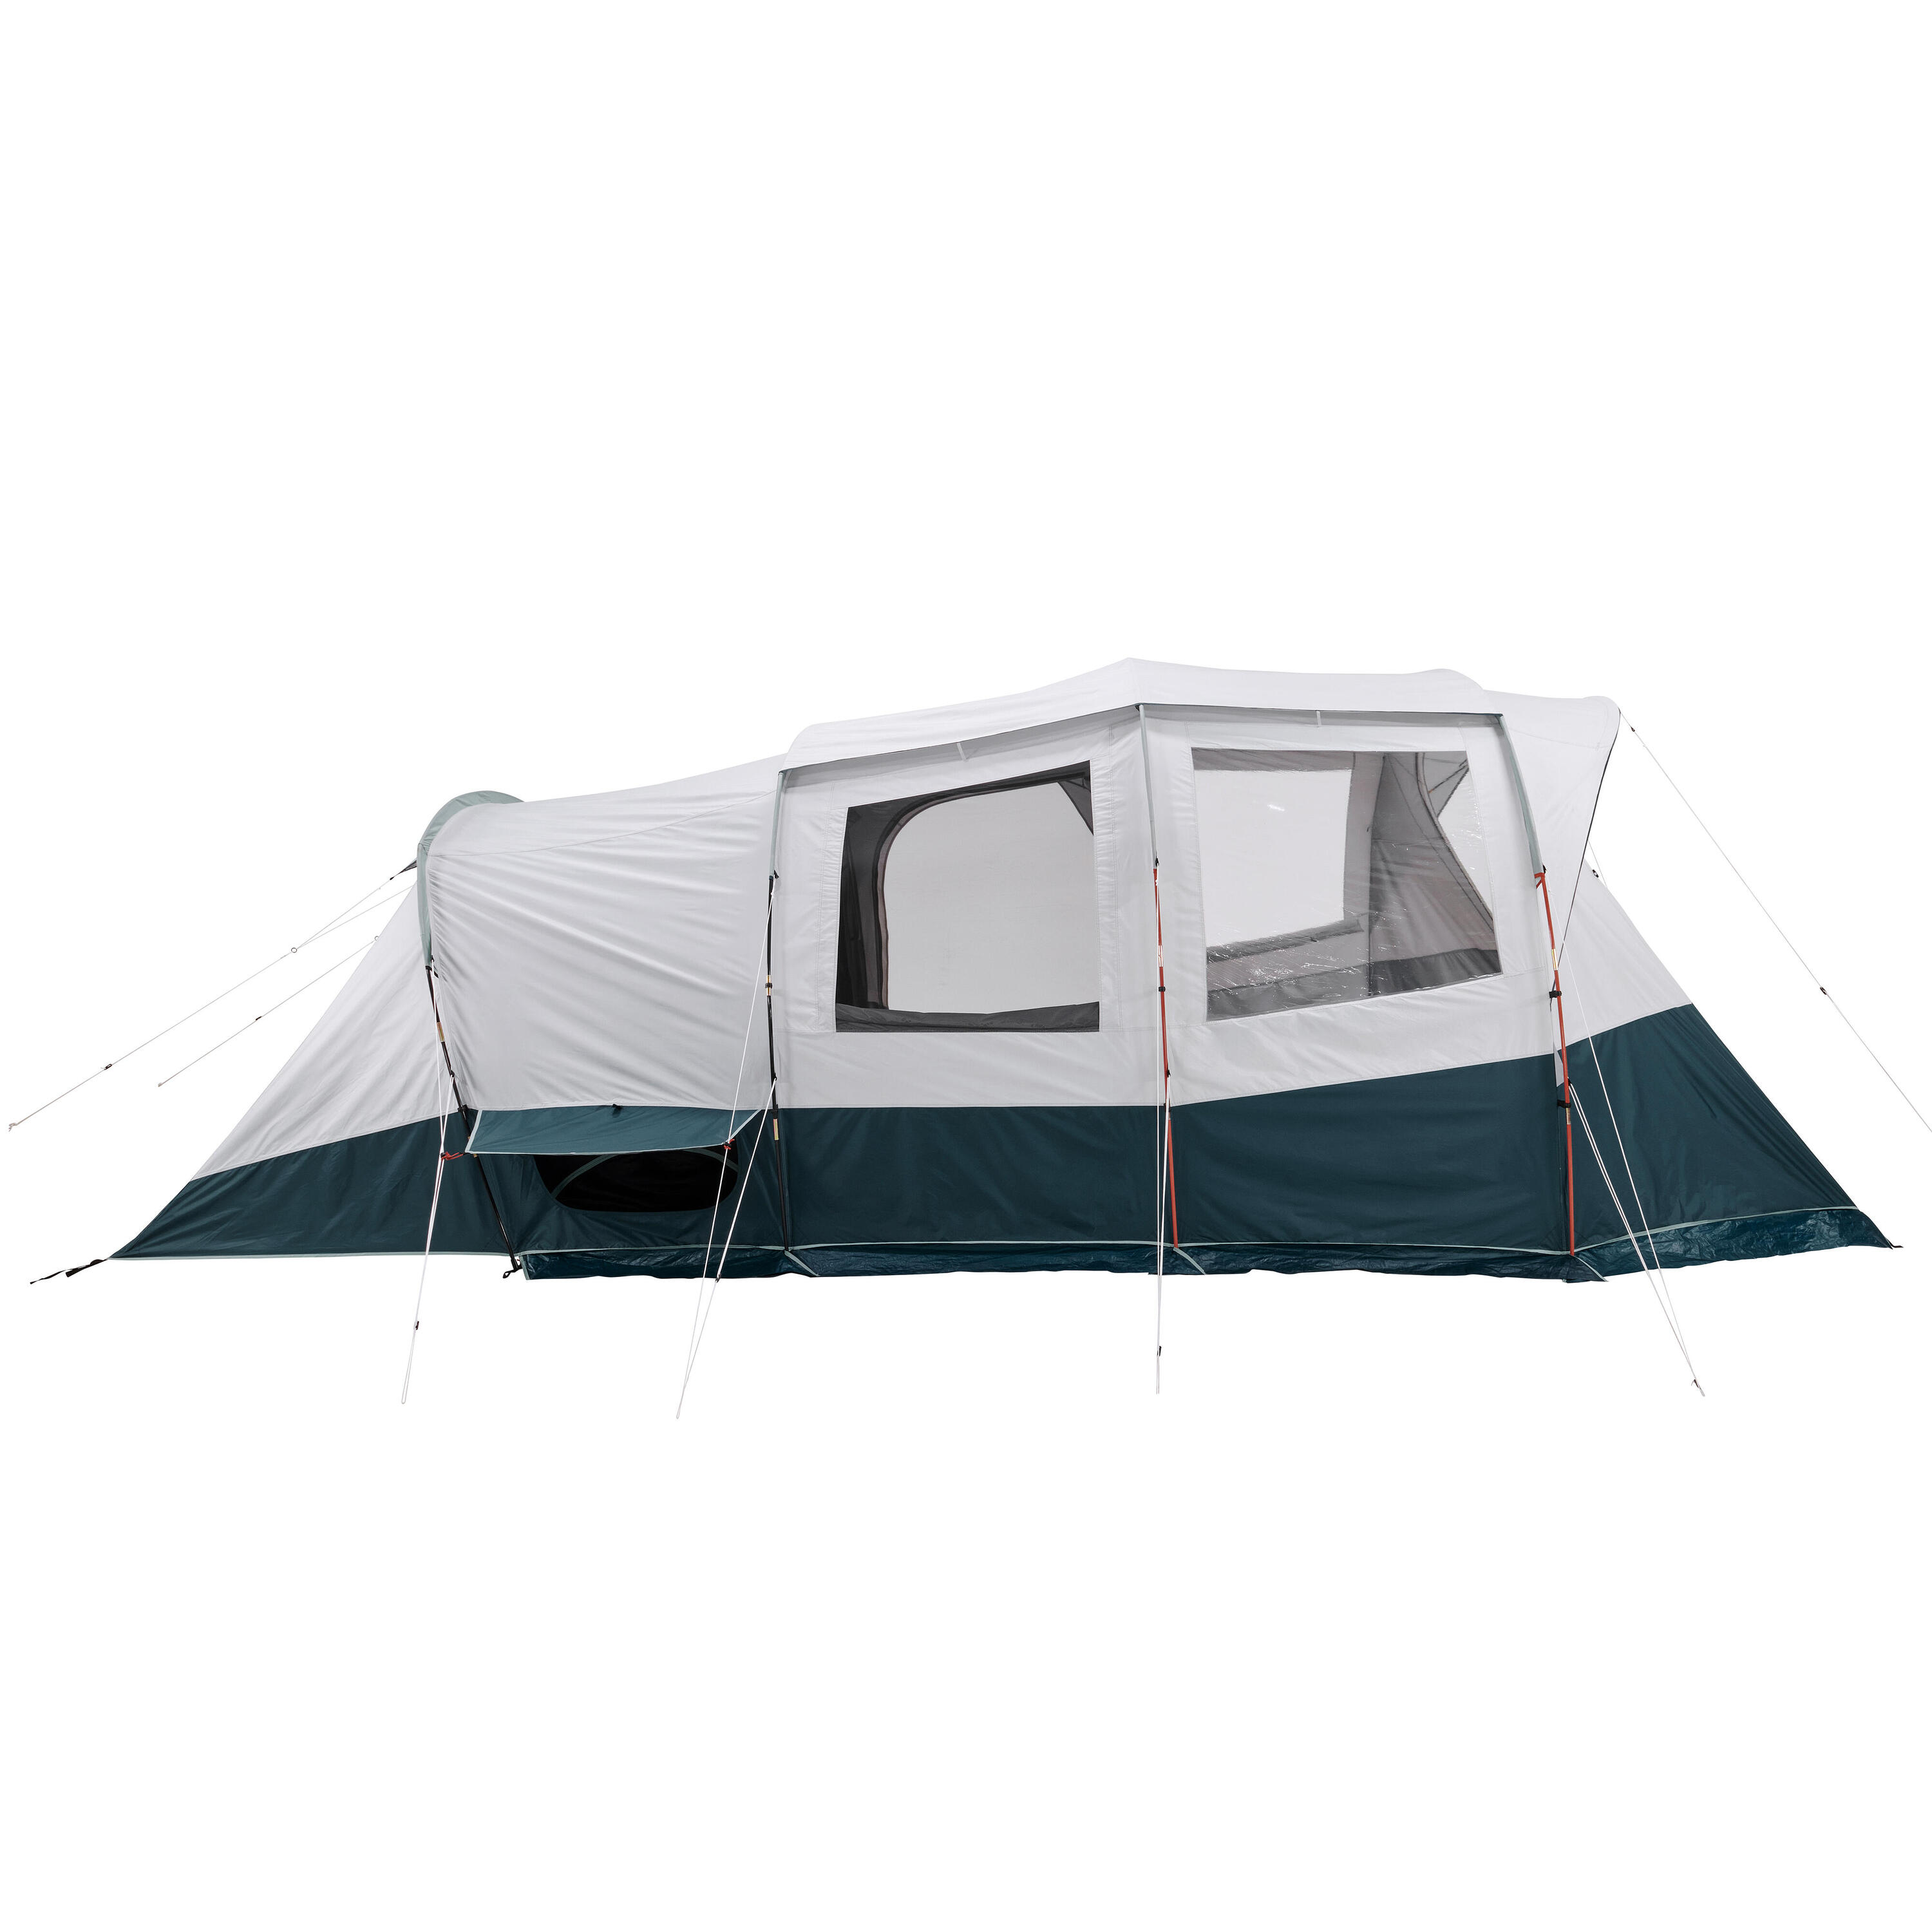 Camping tent with poles - Arpenaz 6.3 F&B - 6 Person - 3 Bedrooms 11/35